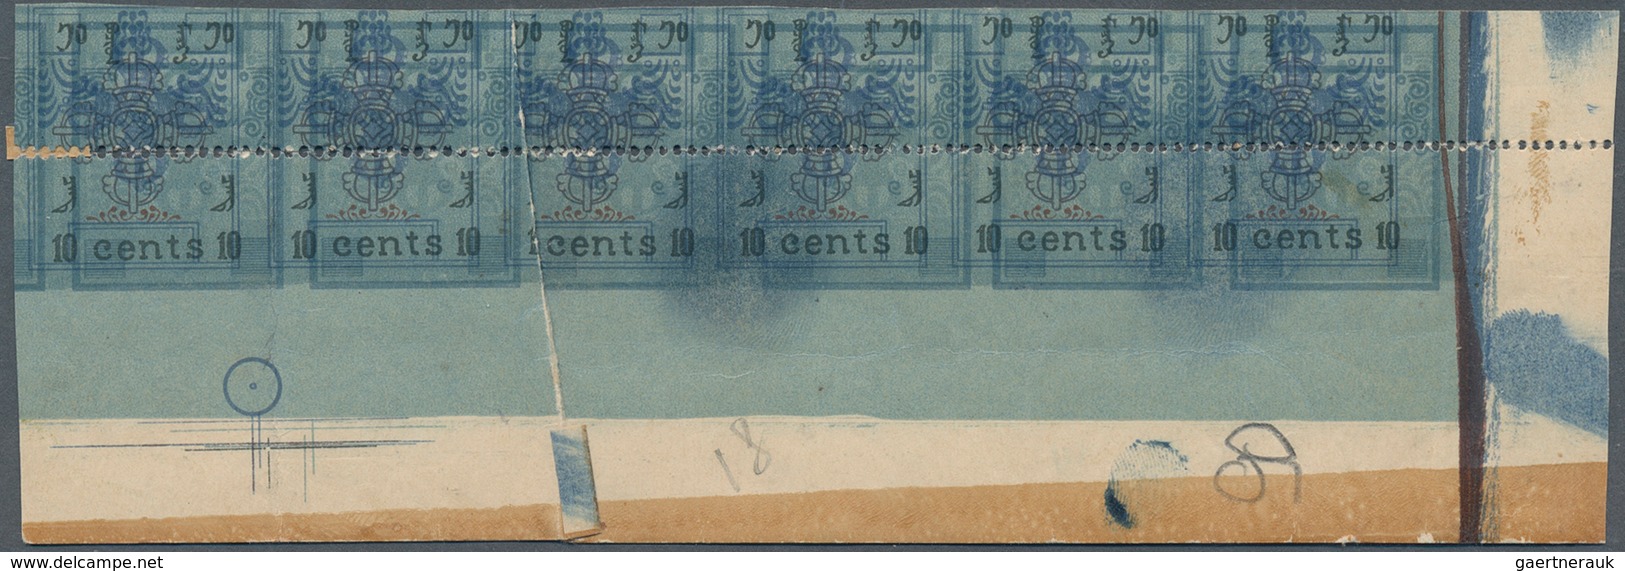 09559 Mongolei: 1924 First Issue 10c. IMPERFORATED PROOF, Bottom Right Corner Strip Of 6, Variety "SHIFTED - Mongolei